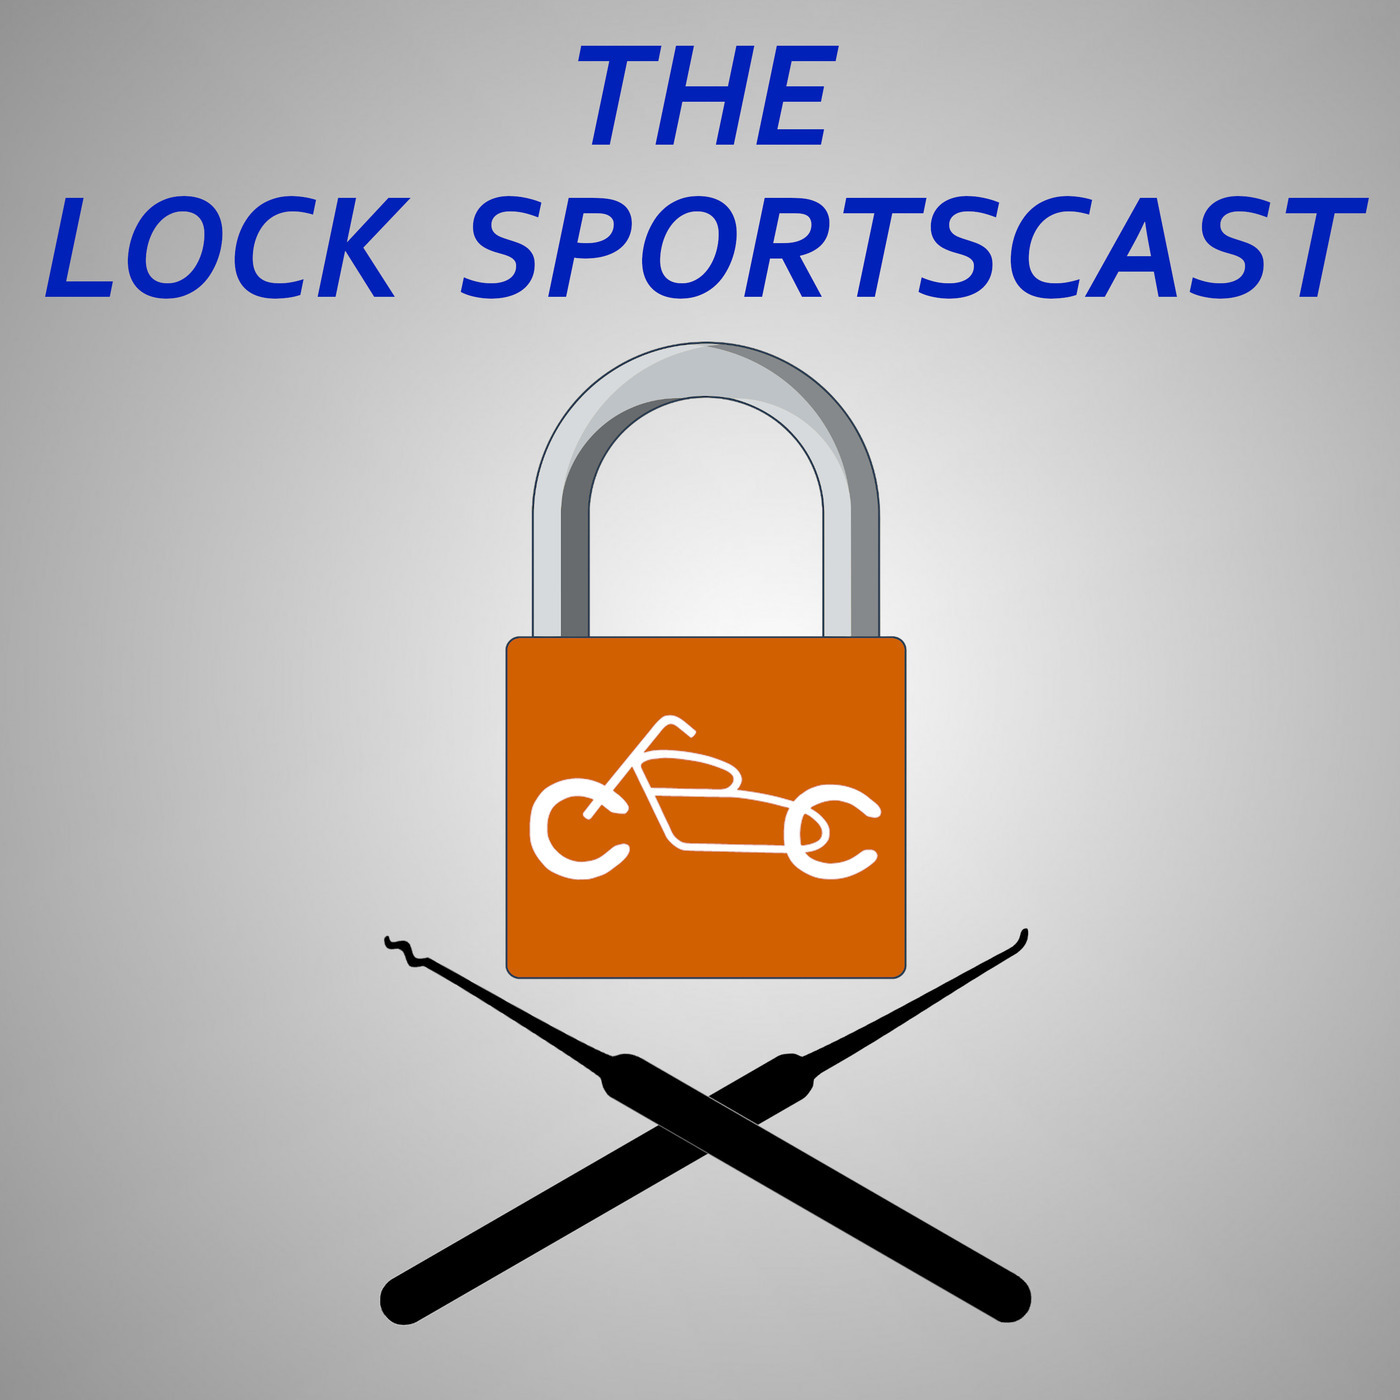 The Lock Sportscast: 126: Breaking Out of Jail with Peanut Butter 